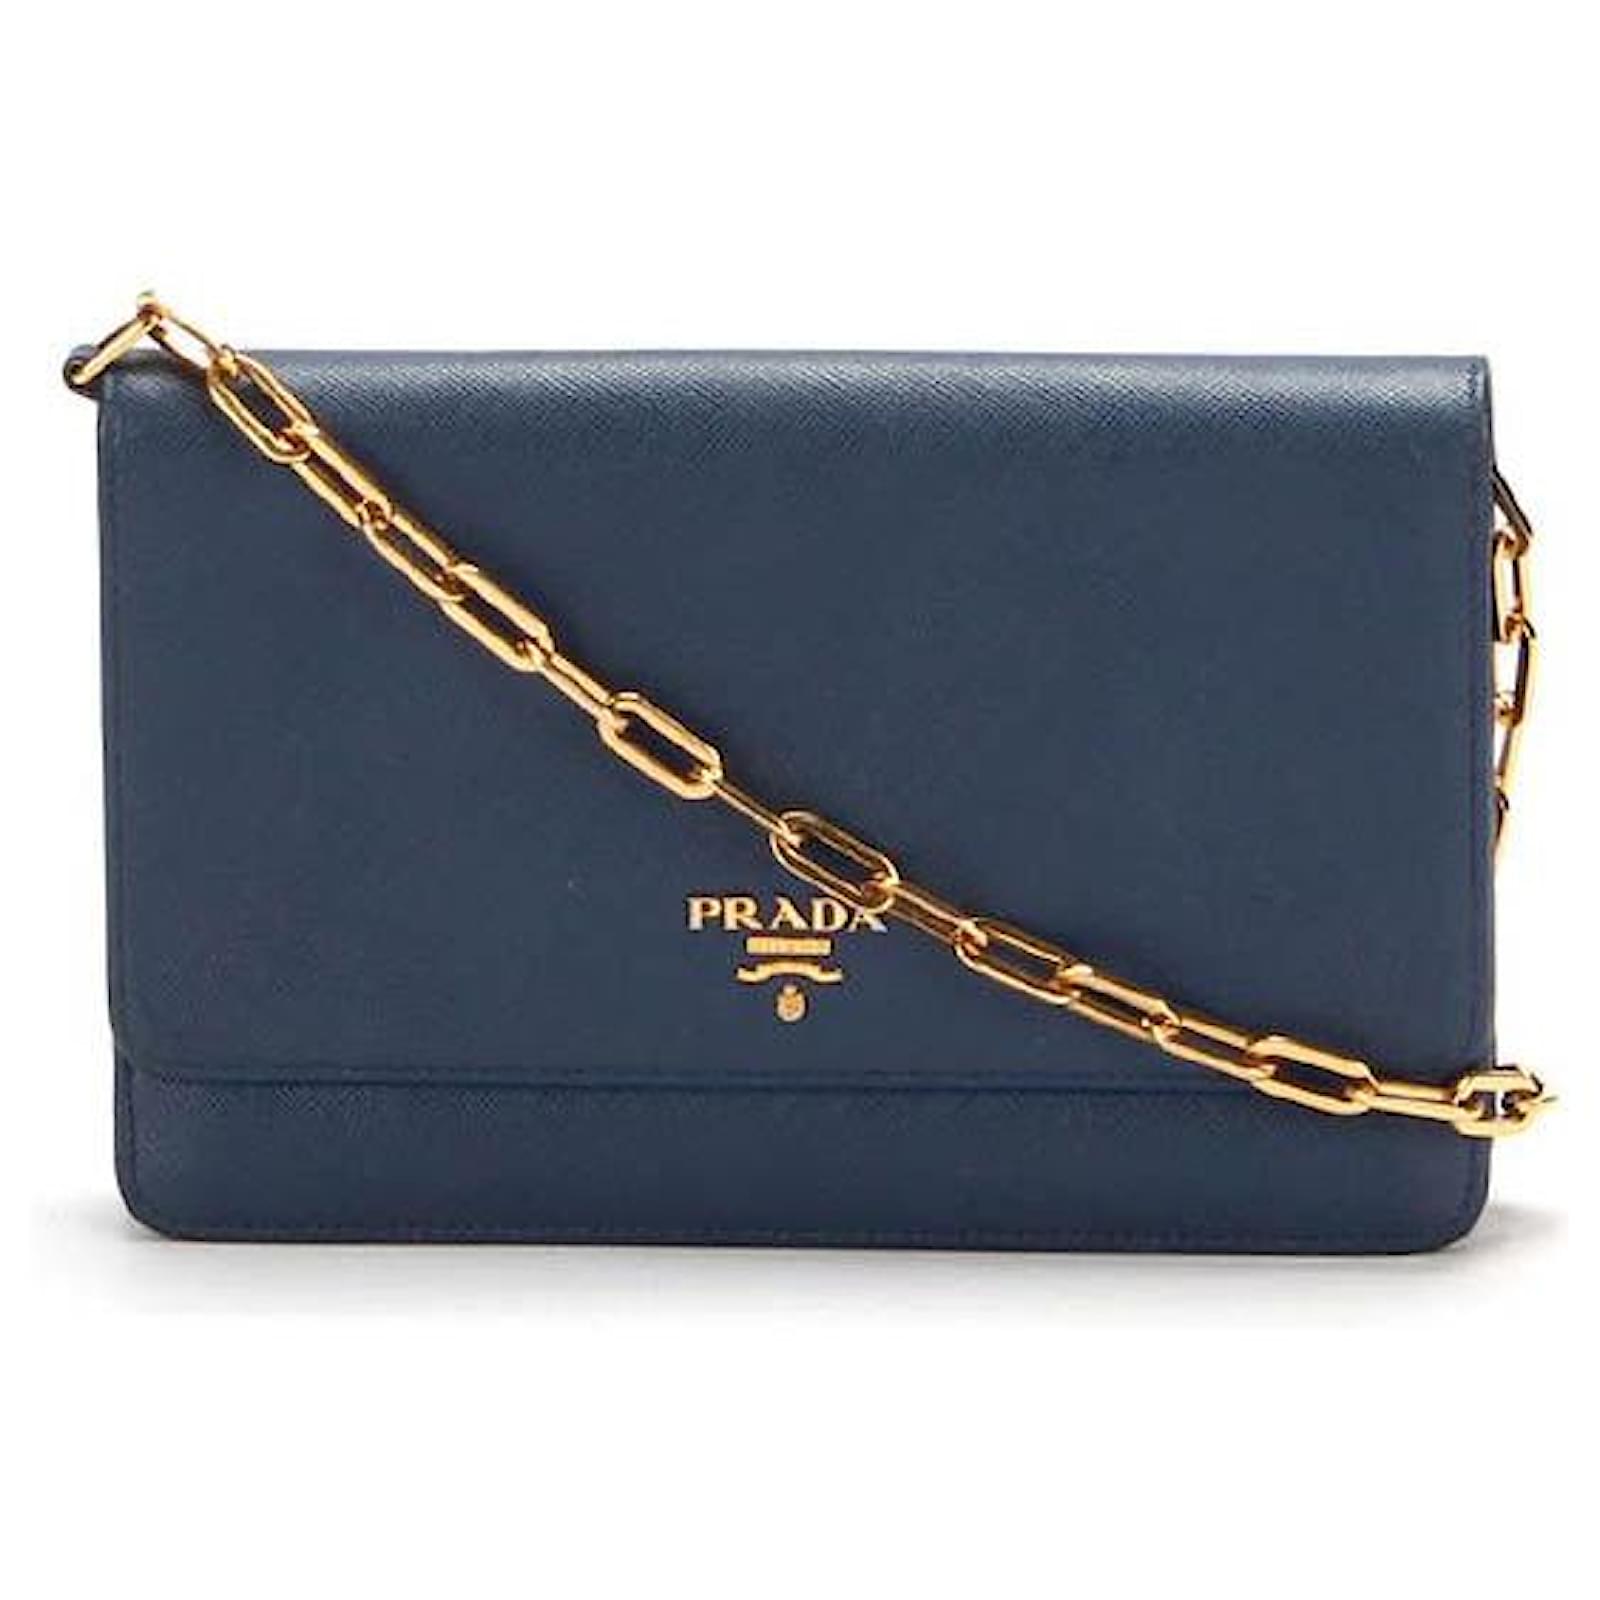 Prada Saffiano Wallet On Chain in blue calf leather leather ref